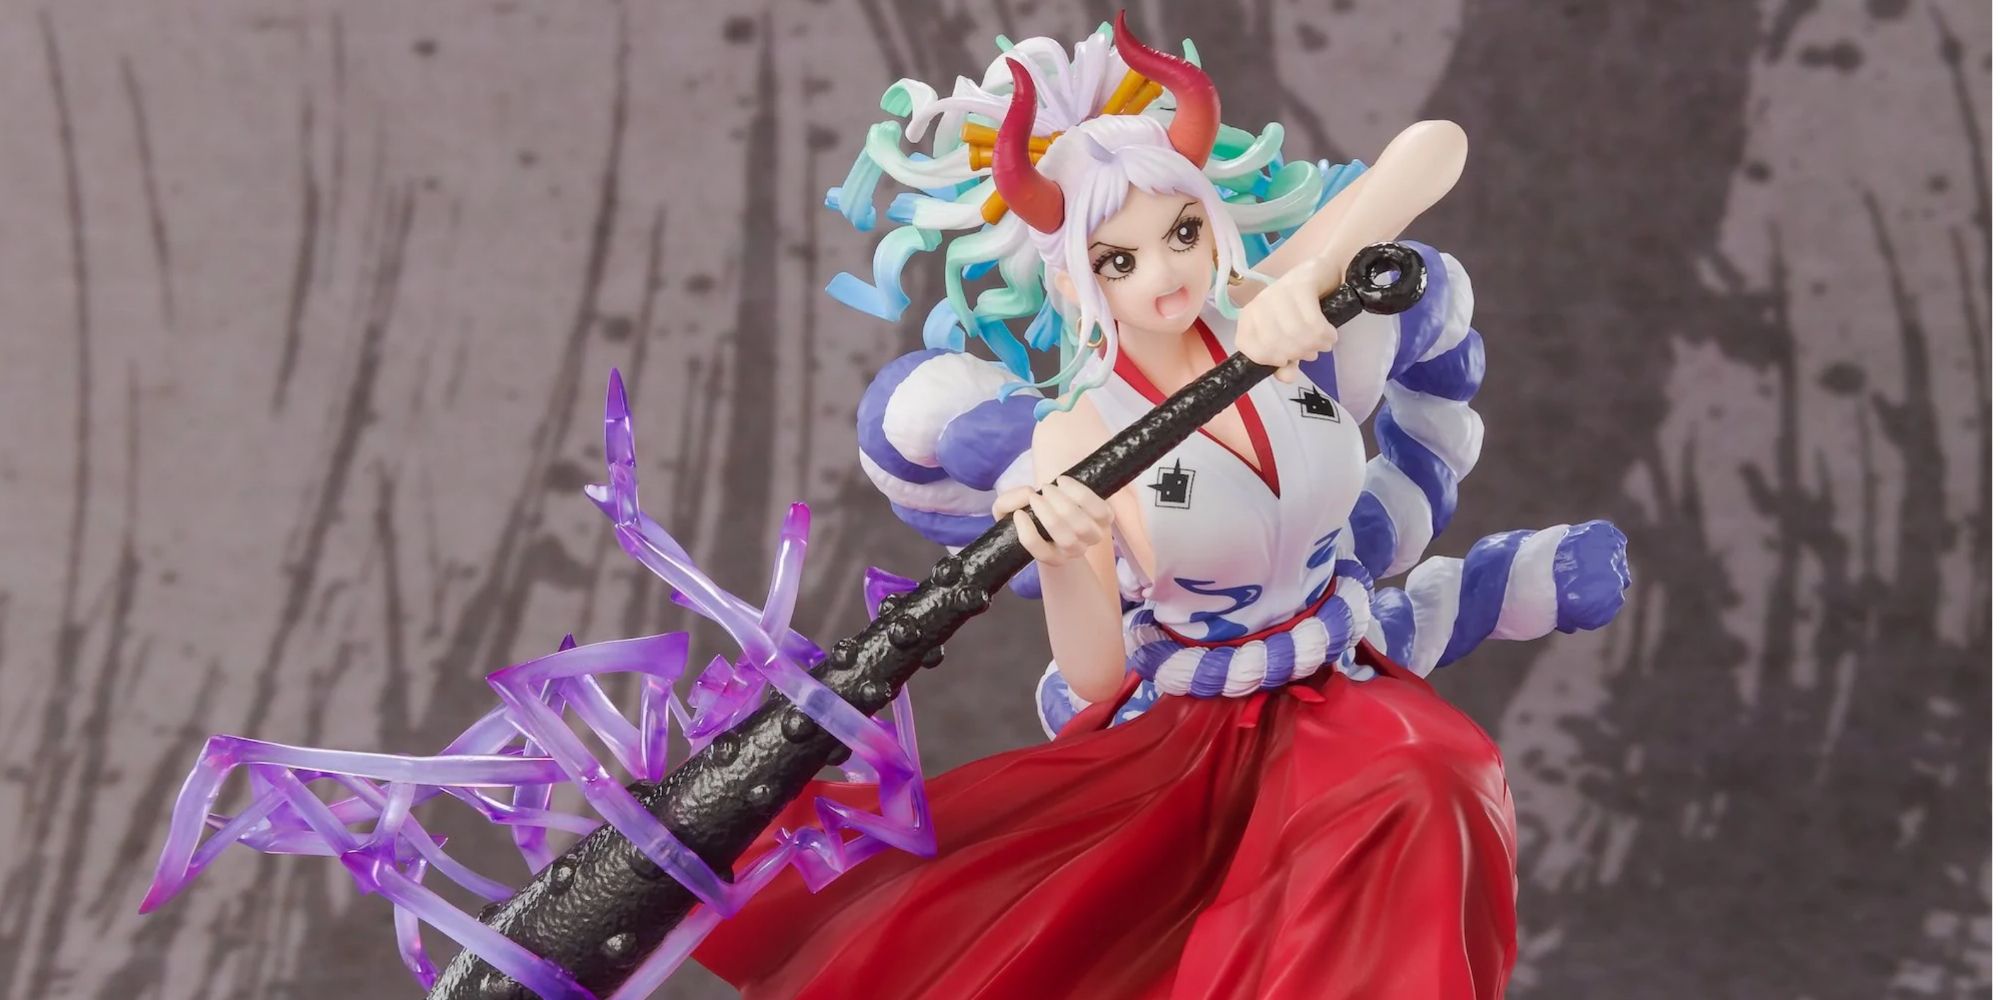 5 of the Best One Piece Figures of All Time